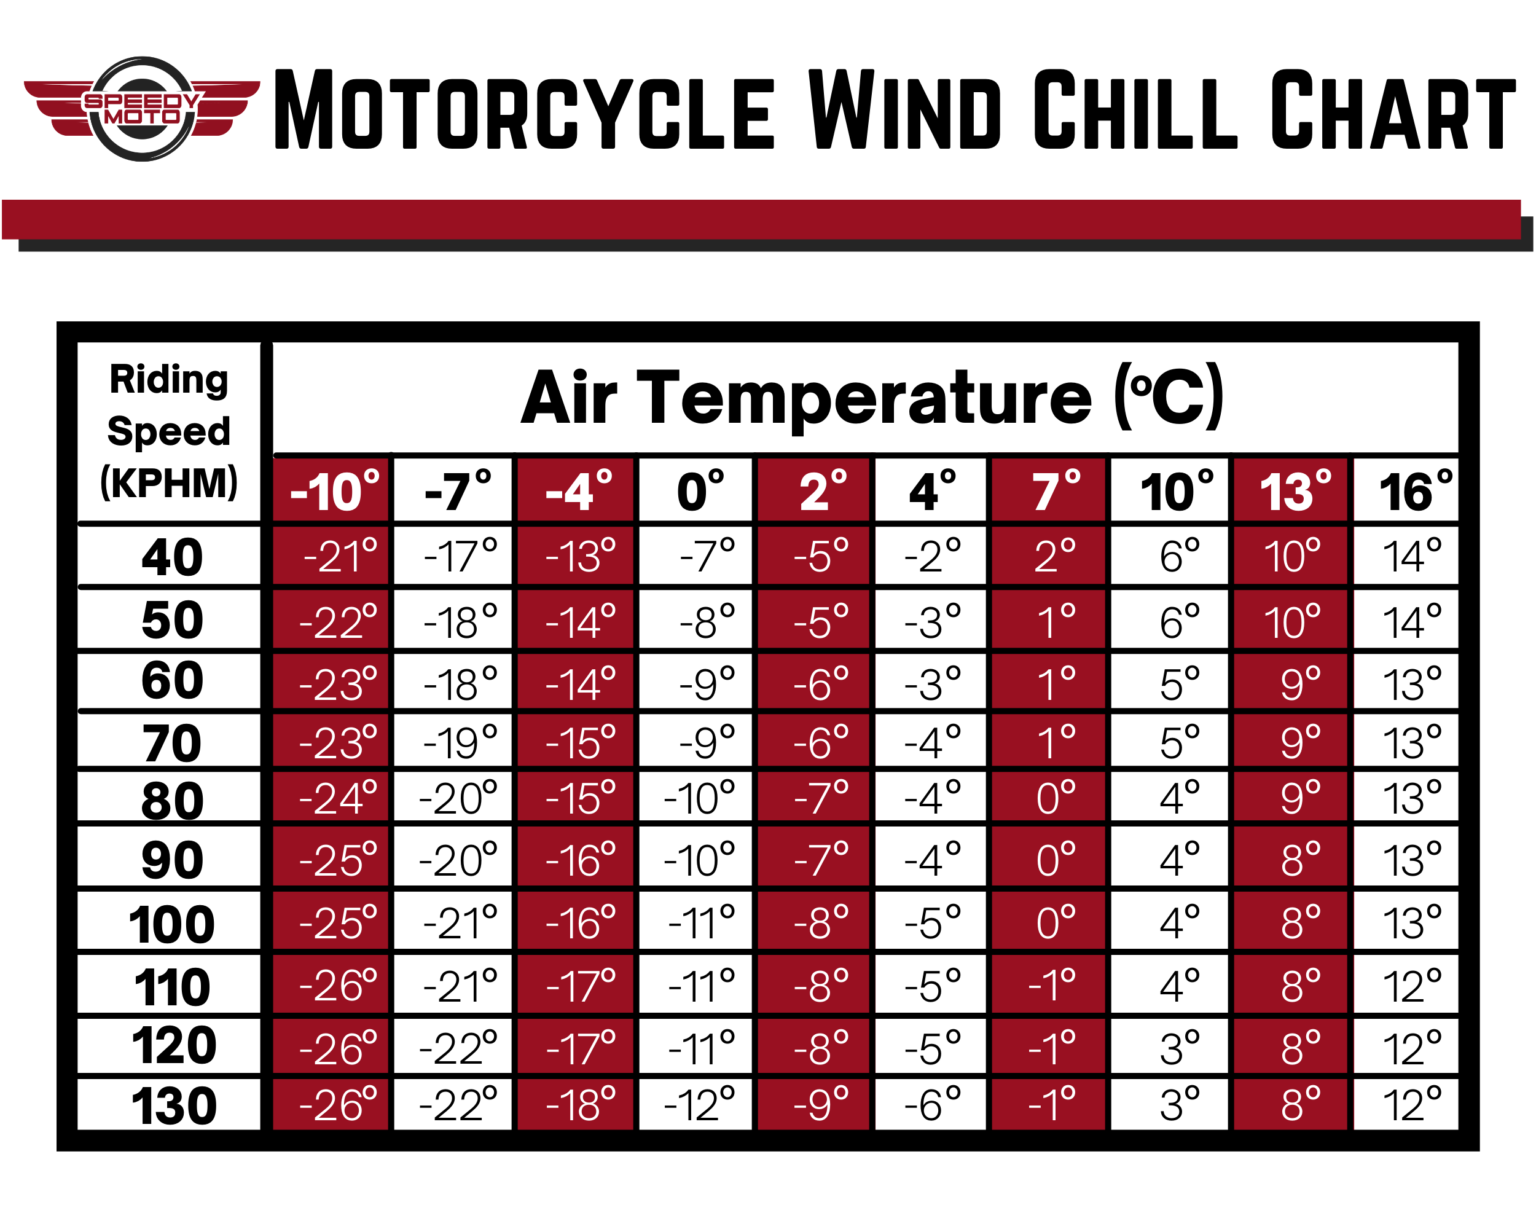 Motorcycle Wind Chill Charts – 2021 Guide To Staying Warm While Riding